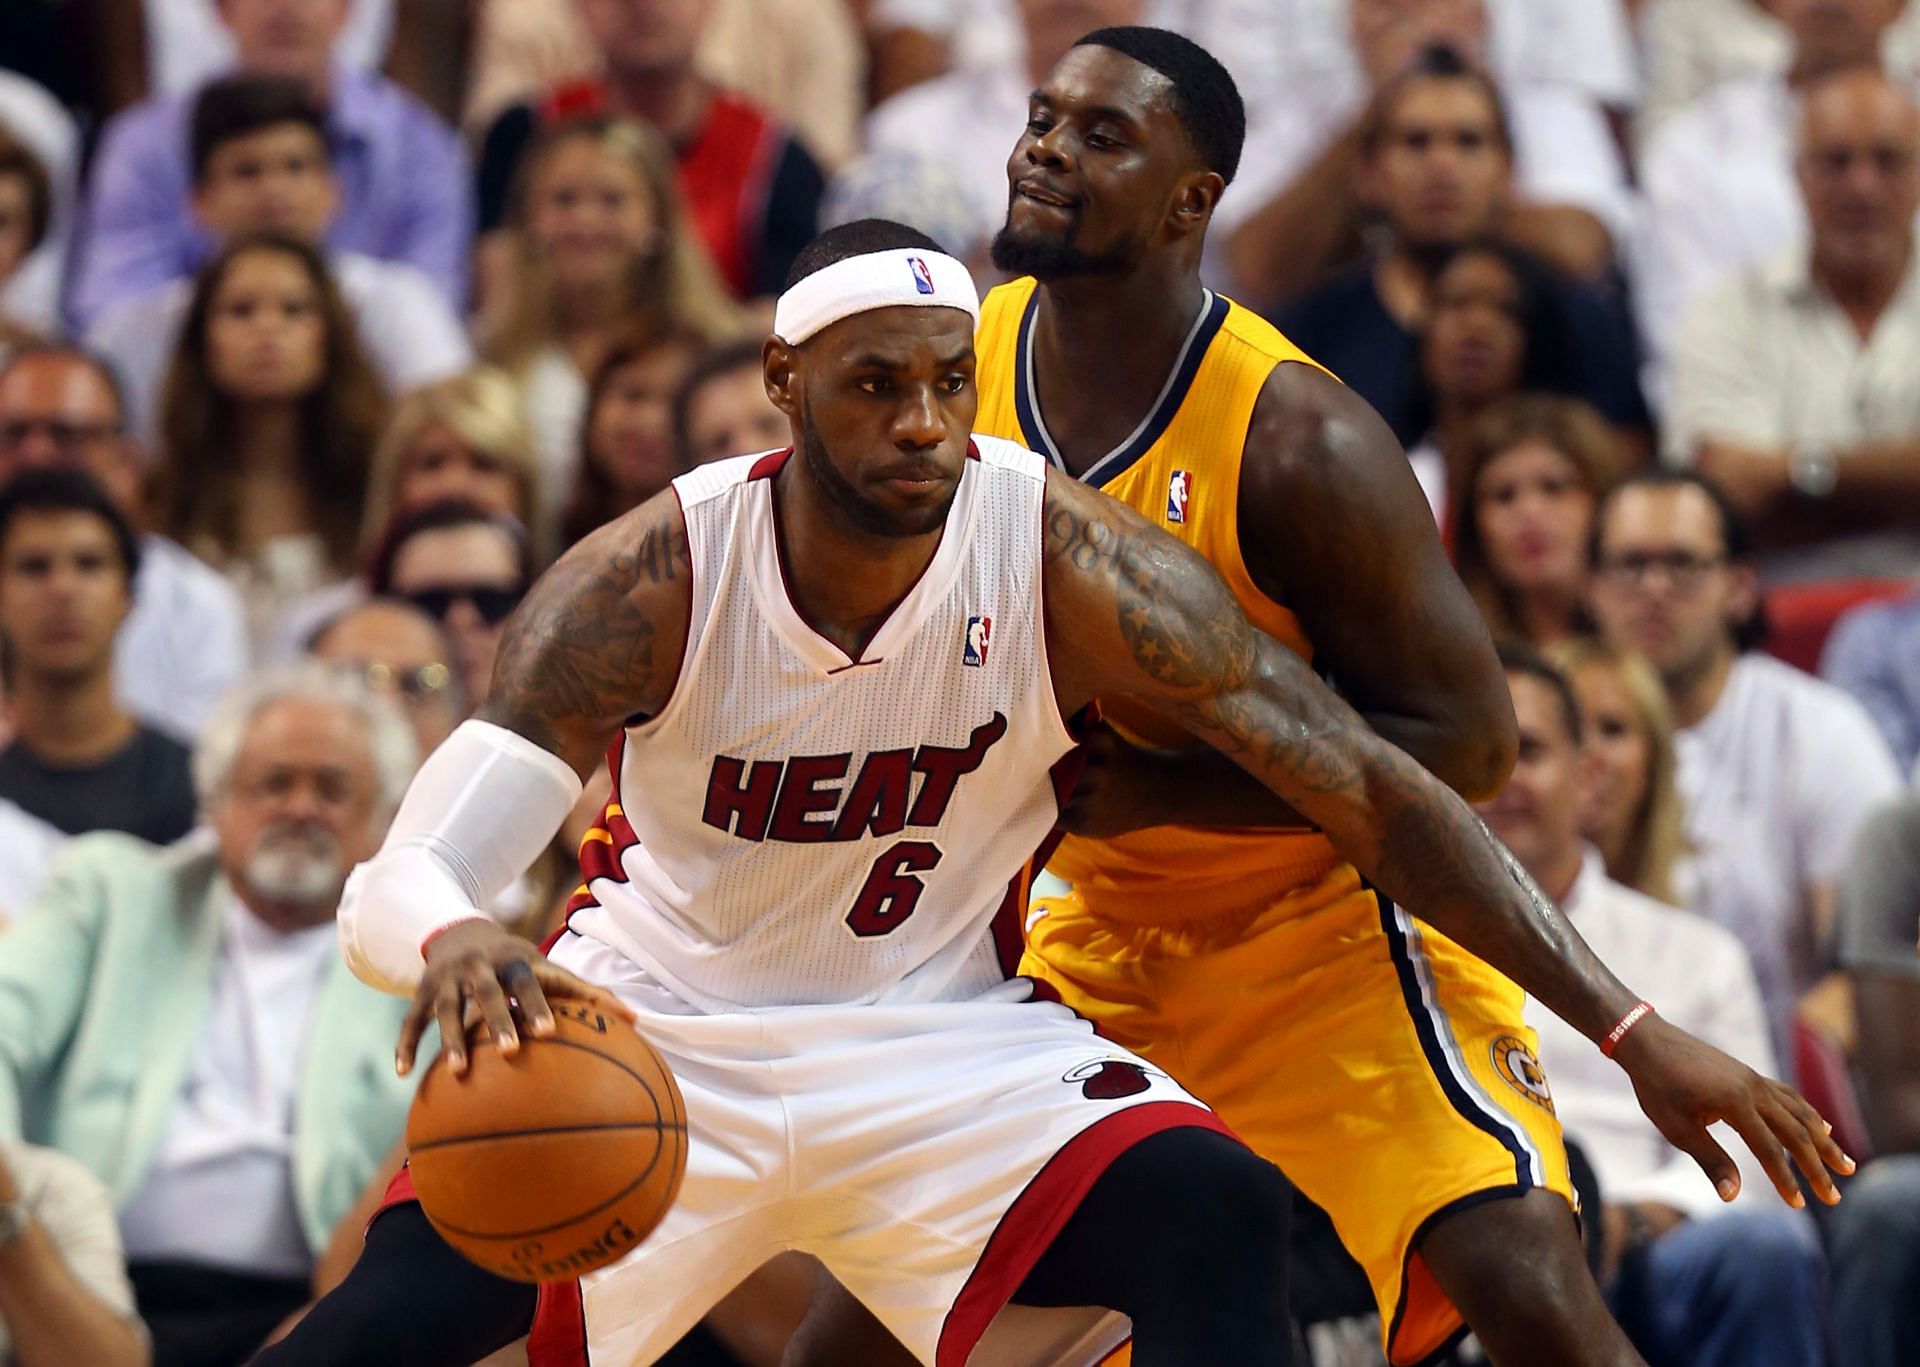 LeBron James #6 of the Miami Heat and Lance Stephenson #1 of the Indiana Pacers